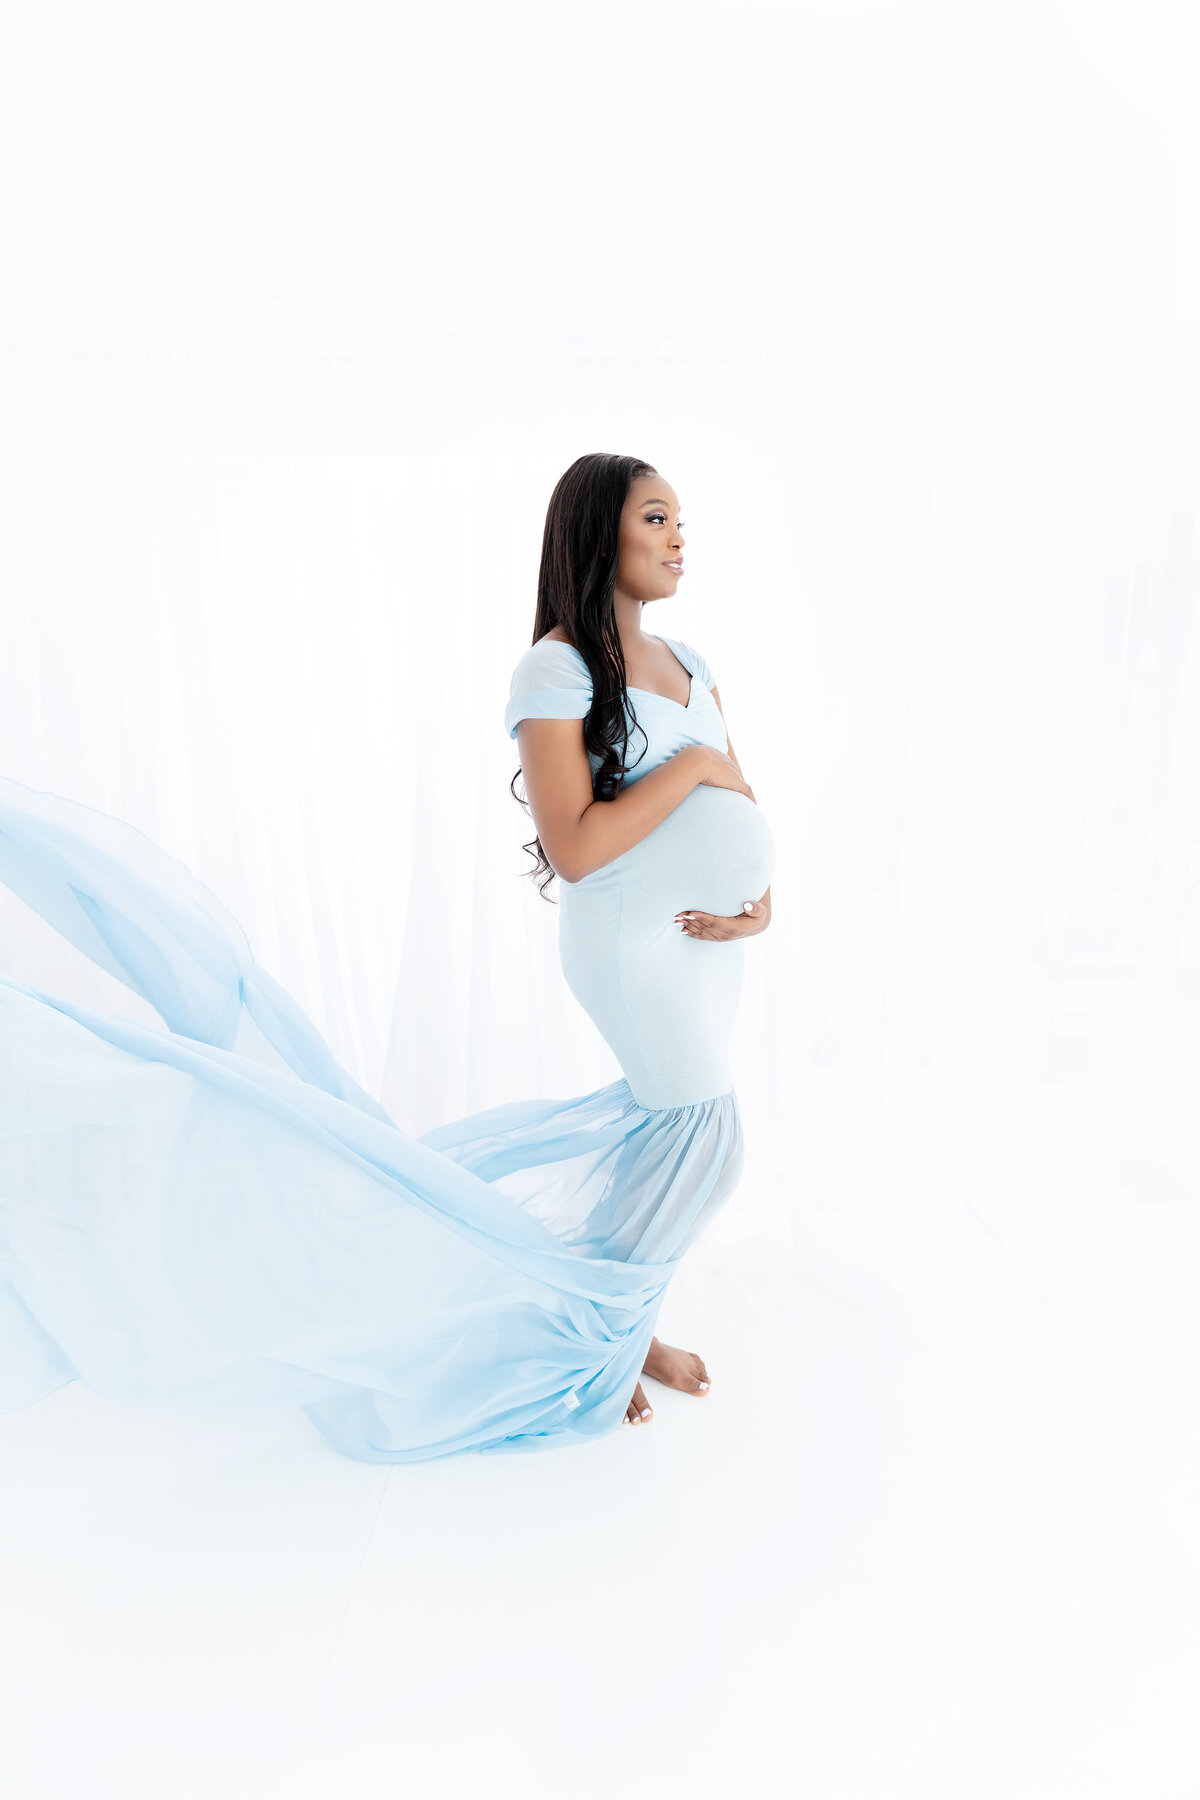 A woman in a flowing maternity gown stands in a studio holding her bumpAtlanta Maternity Photographer